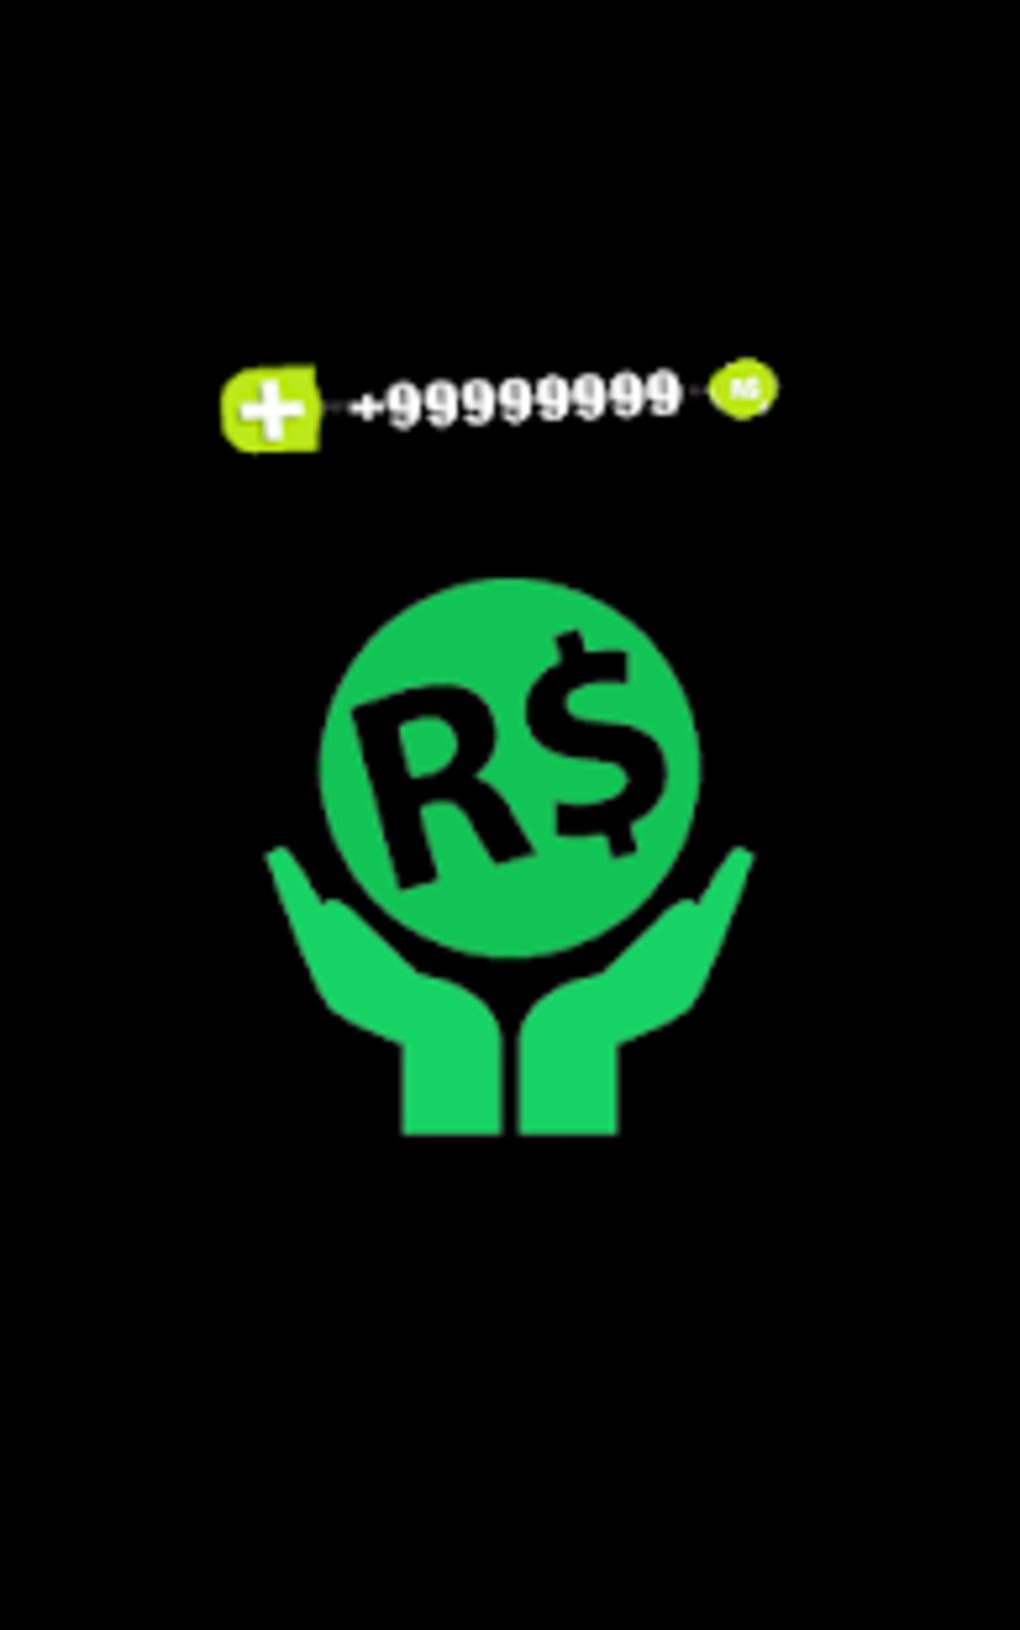 Free Robux Lucky Patcher - roblox robux lucky patcher